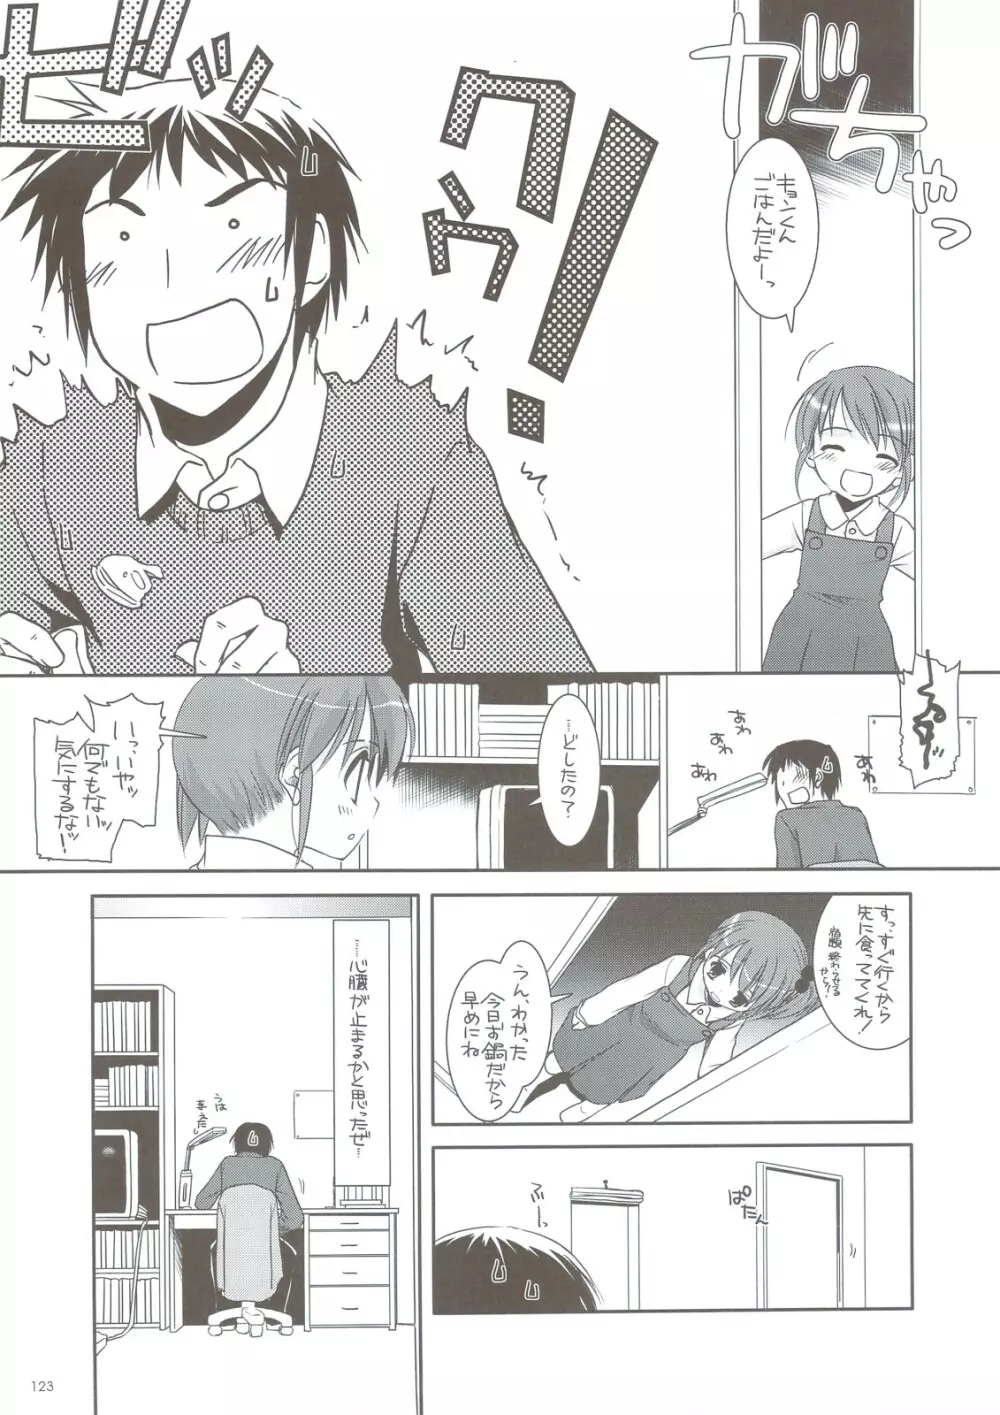 DL-SOS 総集編 Page.118